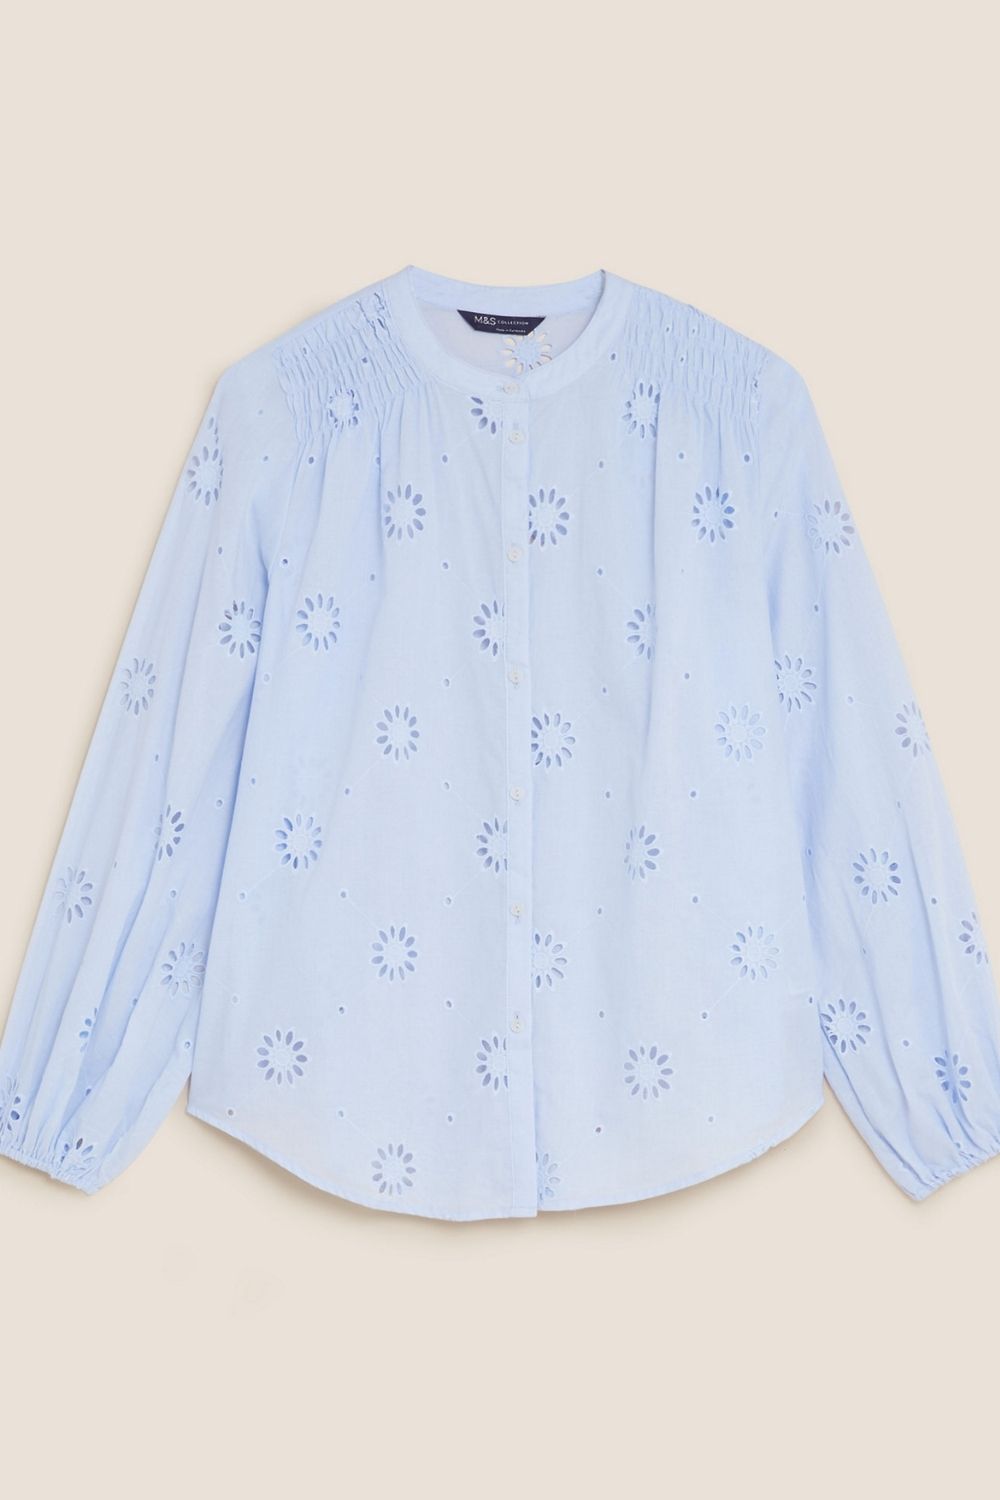 Broderie Anglaise Is Summer's Most Romantic Trend: Try These Pieces ...